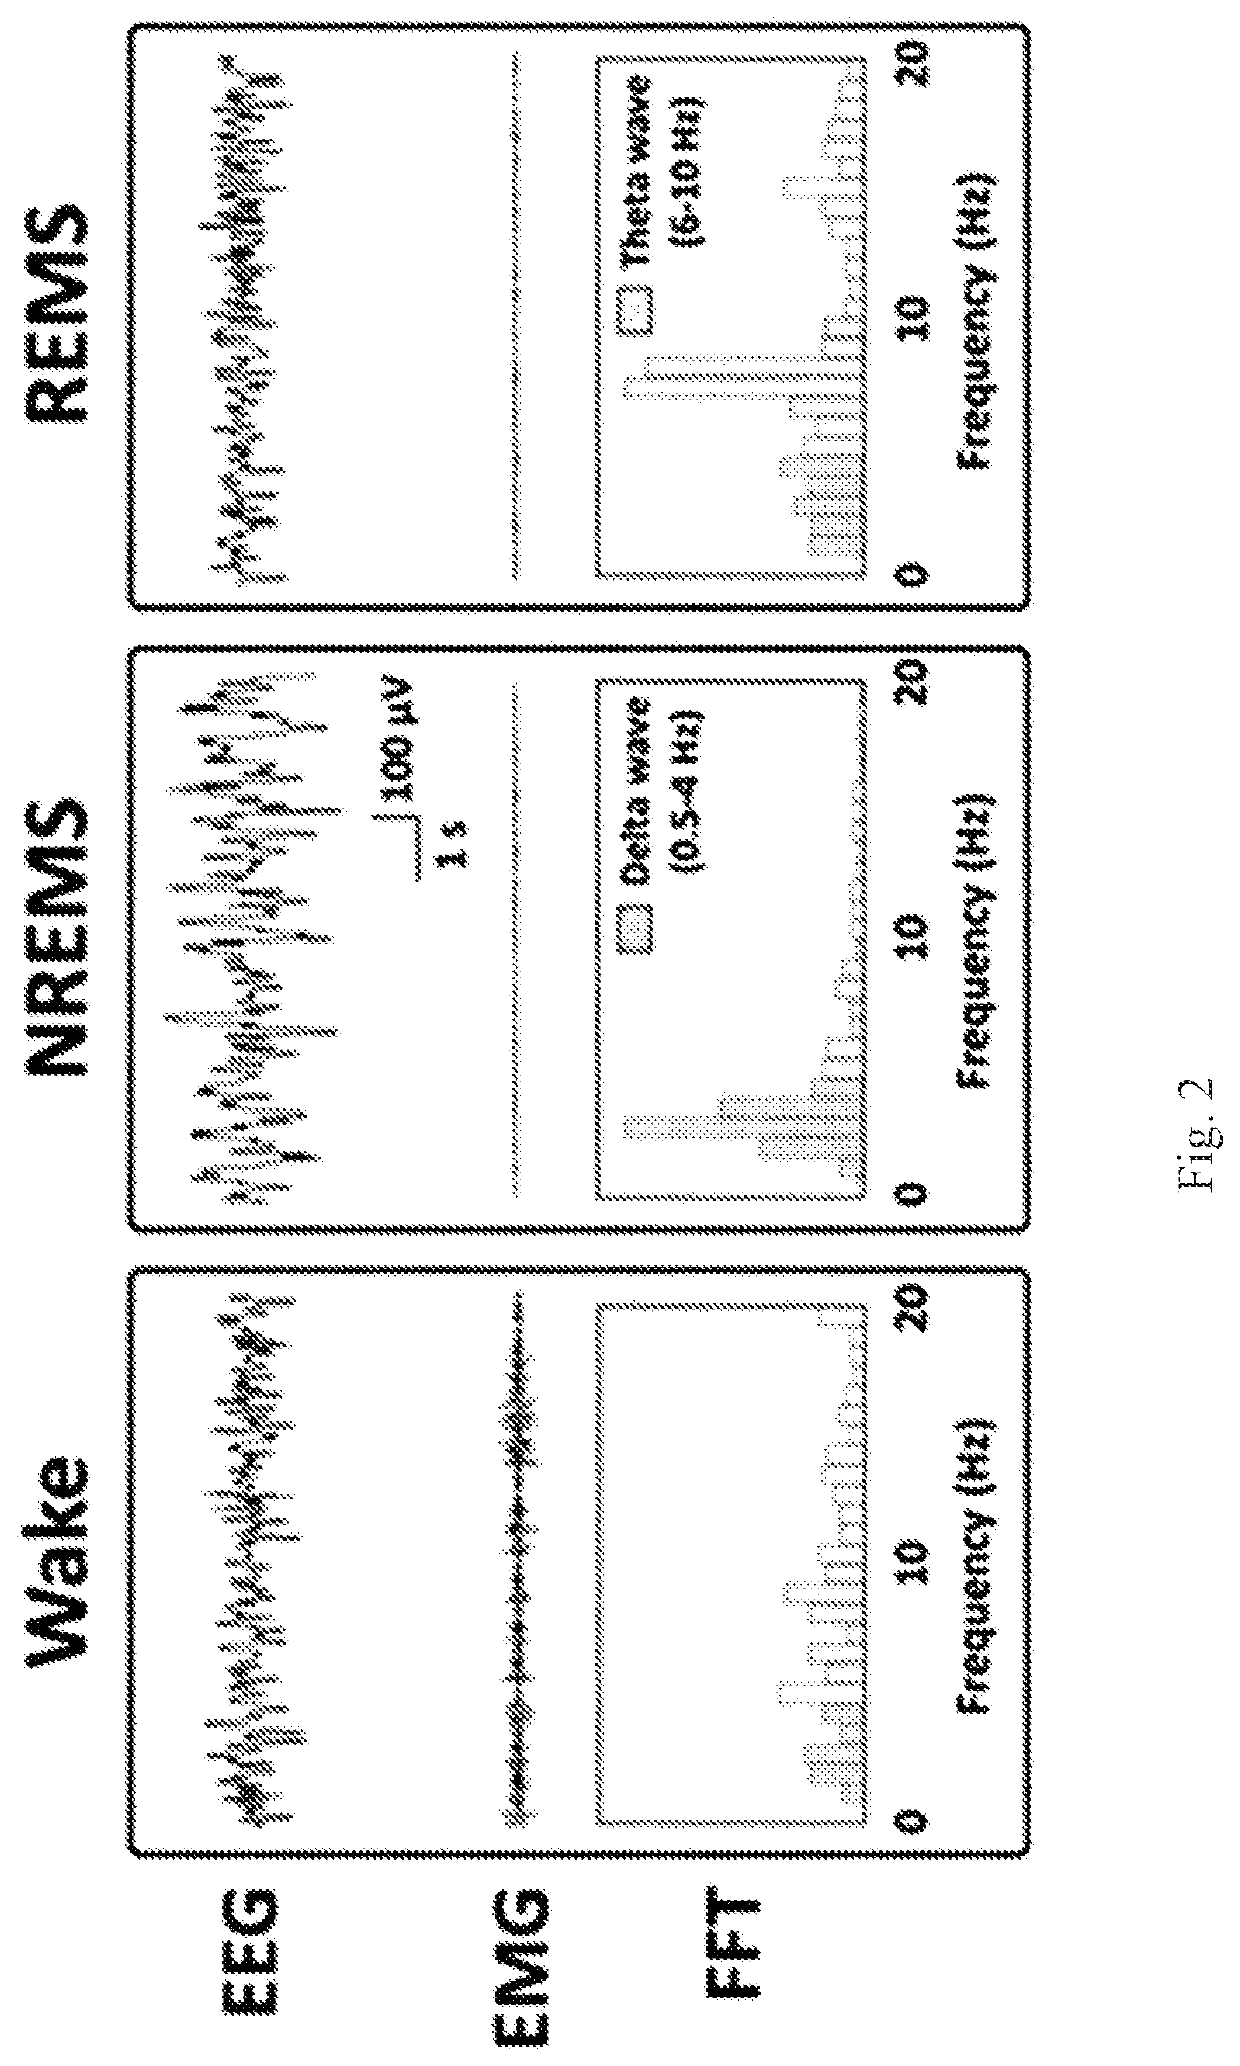 Compositions for ameliorating, preventing or treating somnipathy including phloroglucinol as active ingredient and compositions for suppressing intolerance to or alleviating side effects of agonist at benzodiazepine binding site of GABA-A receptor including phloroglucinol as active ingredient